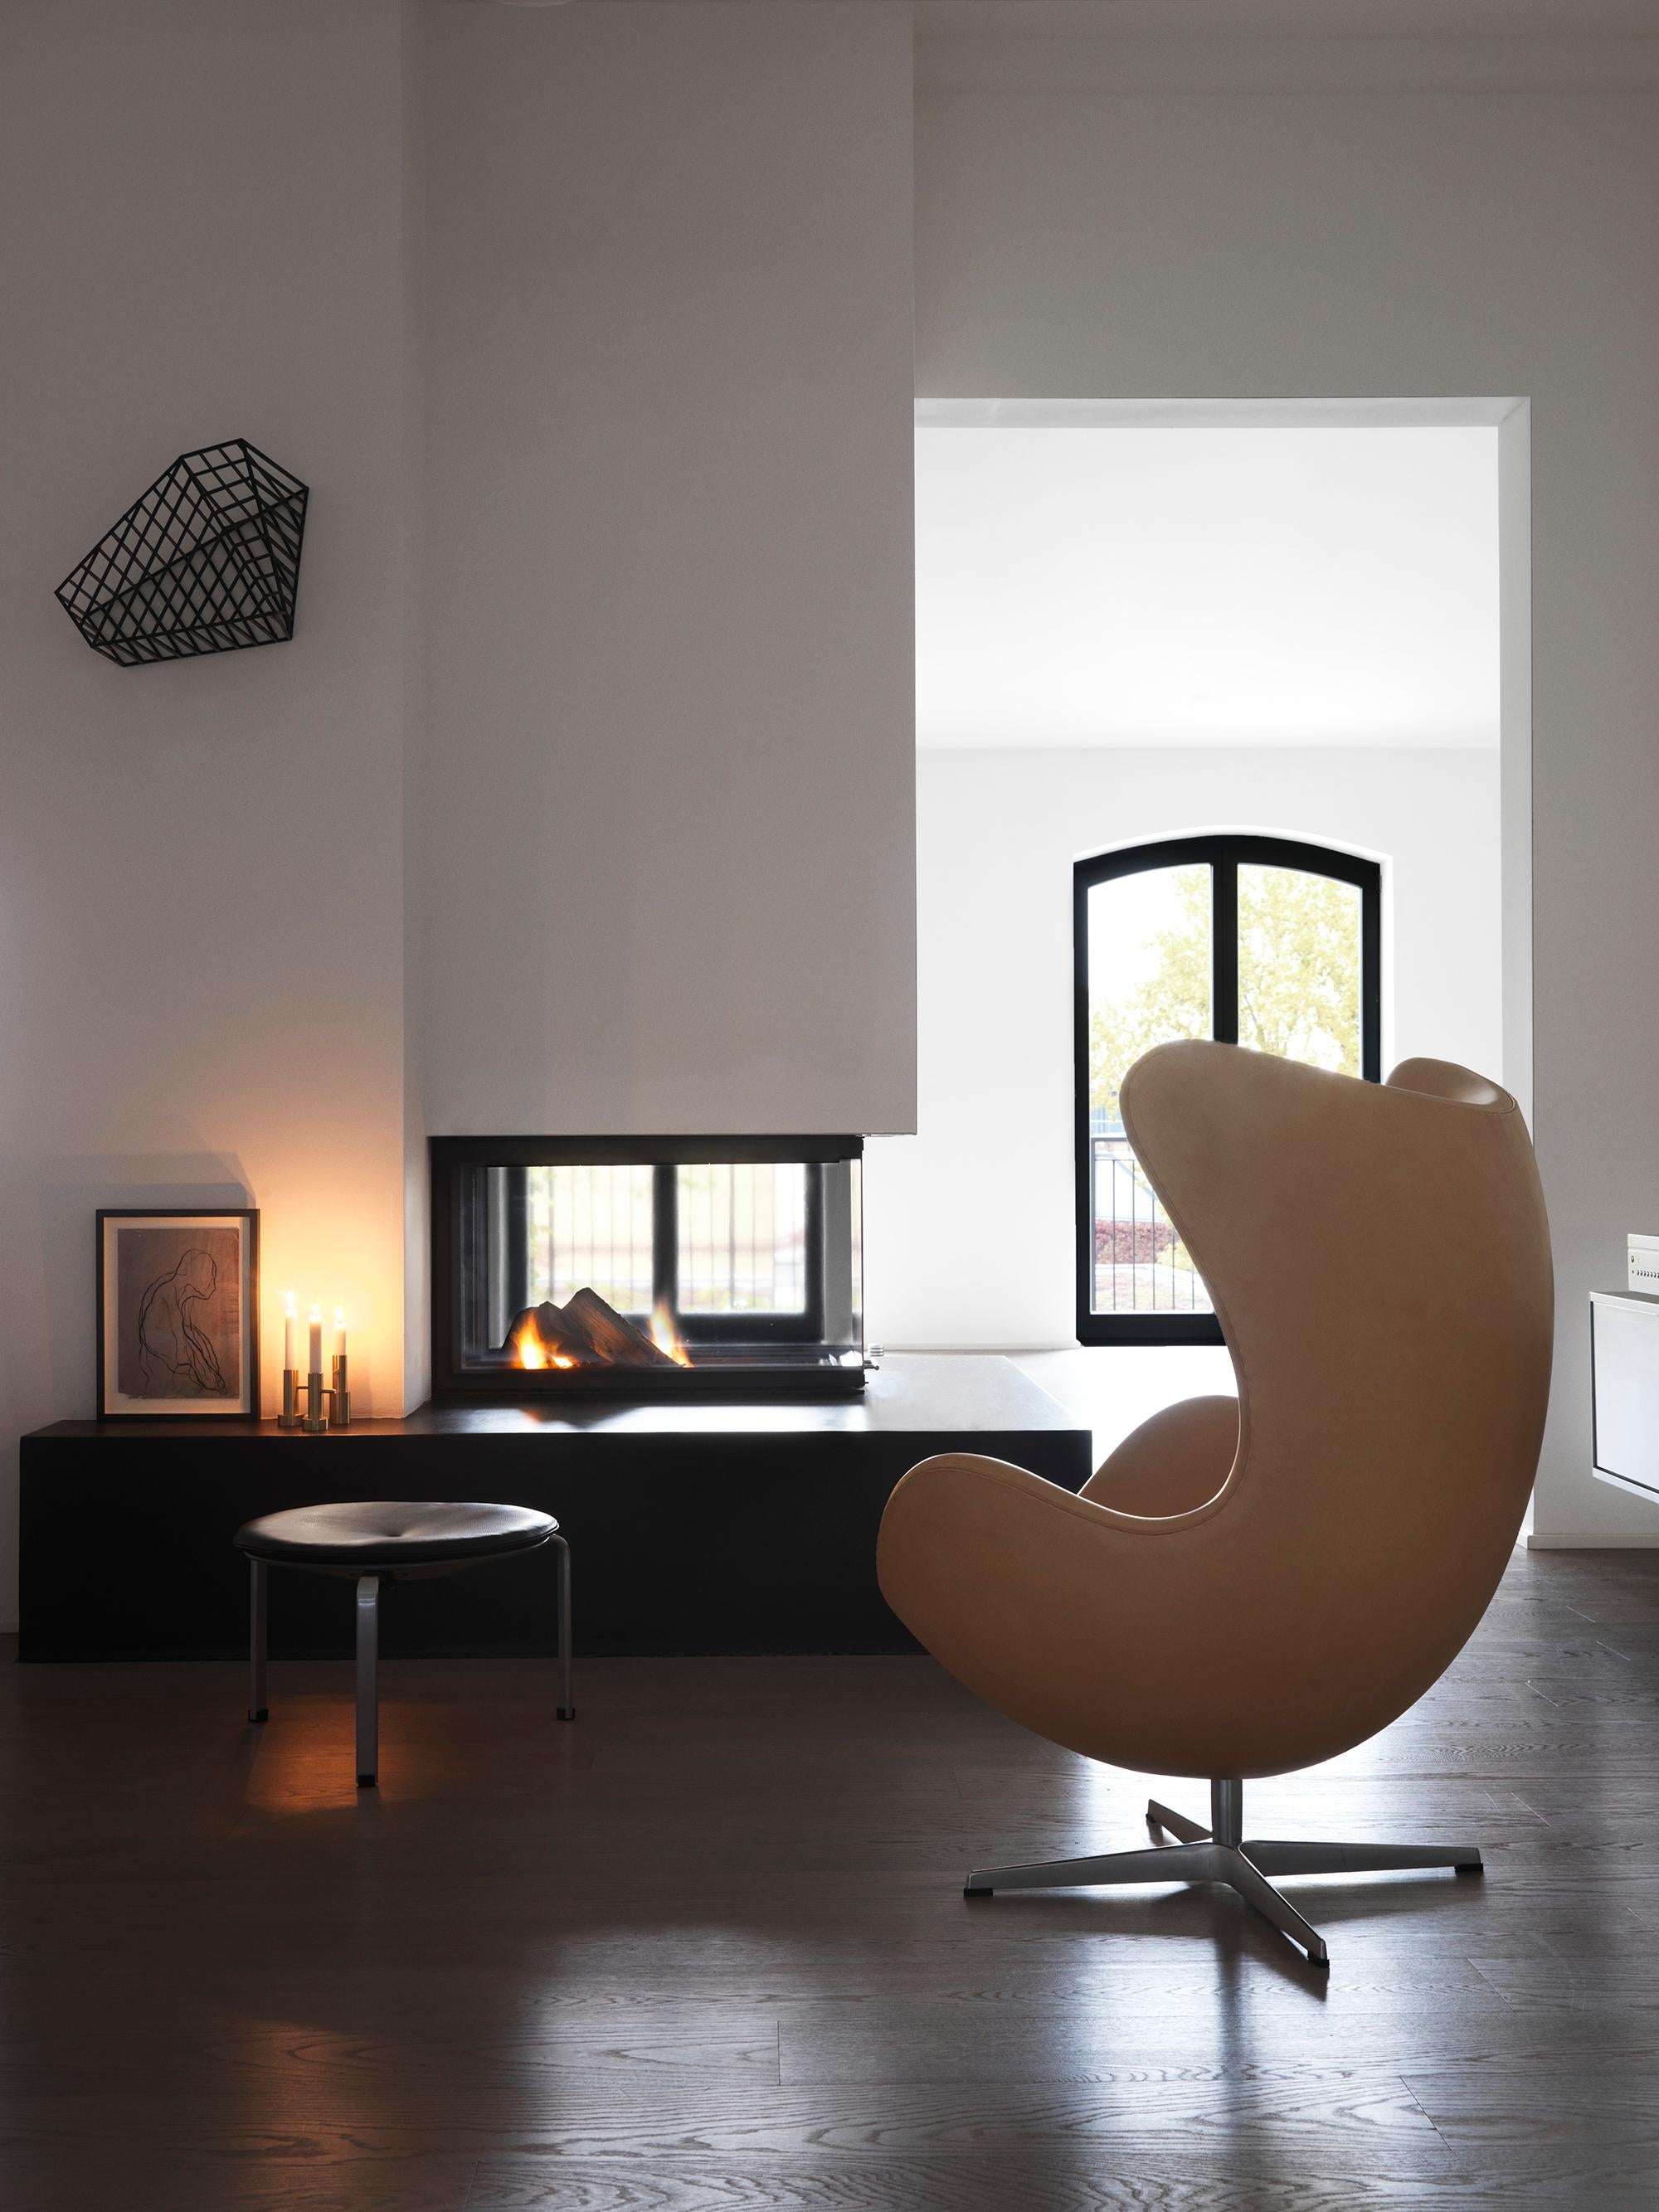 Arne Jacobsen 'Egg' Chair for Fritz Hansen in Leather Upholstery (Cat. 4) In New Condition For Sale In Glendale, CA